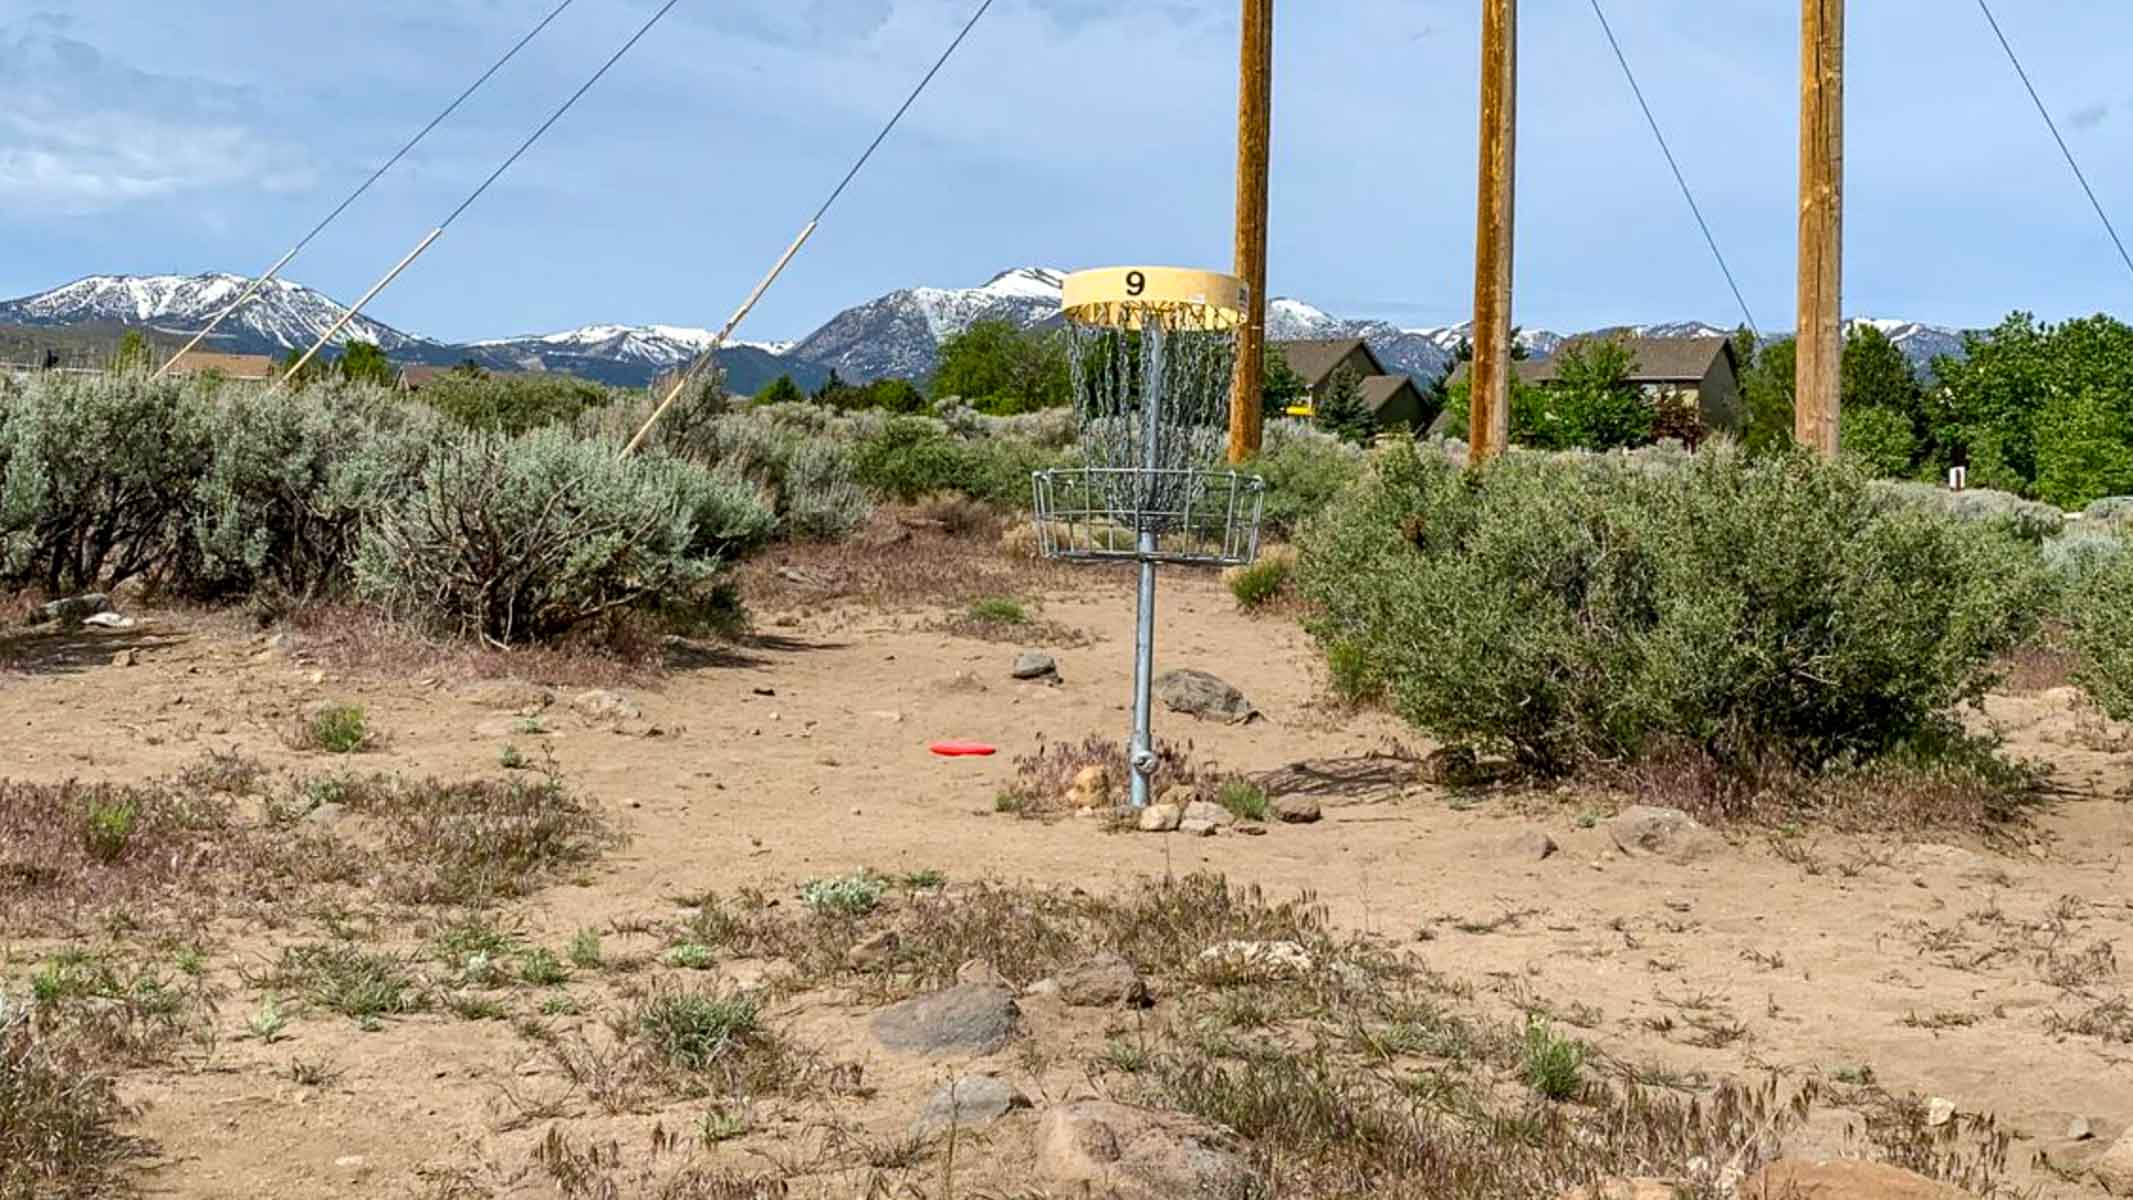 The Wedge Park Disc Golf Course In Reno, NV